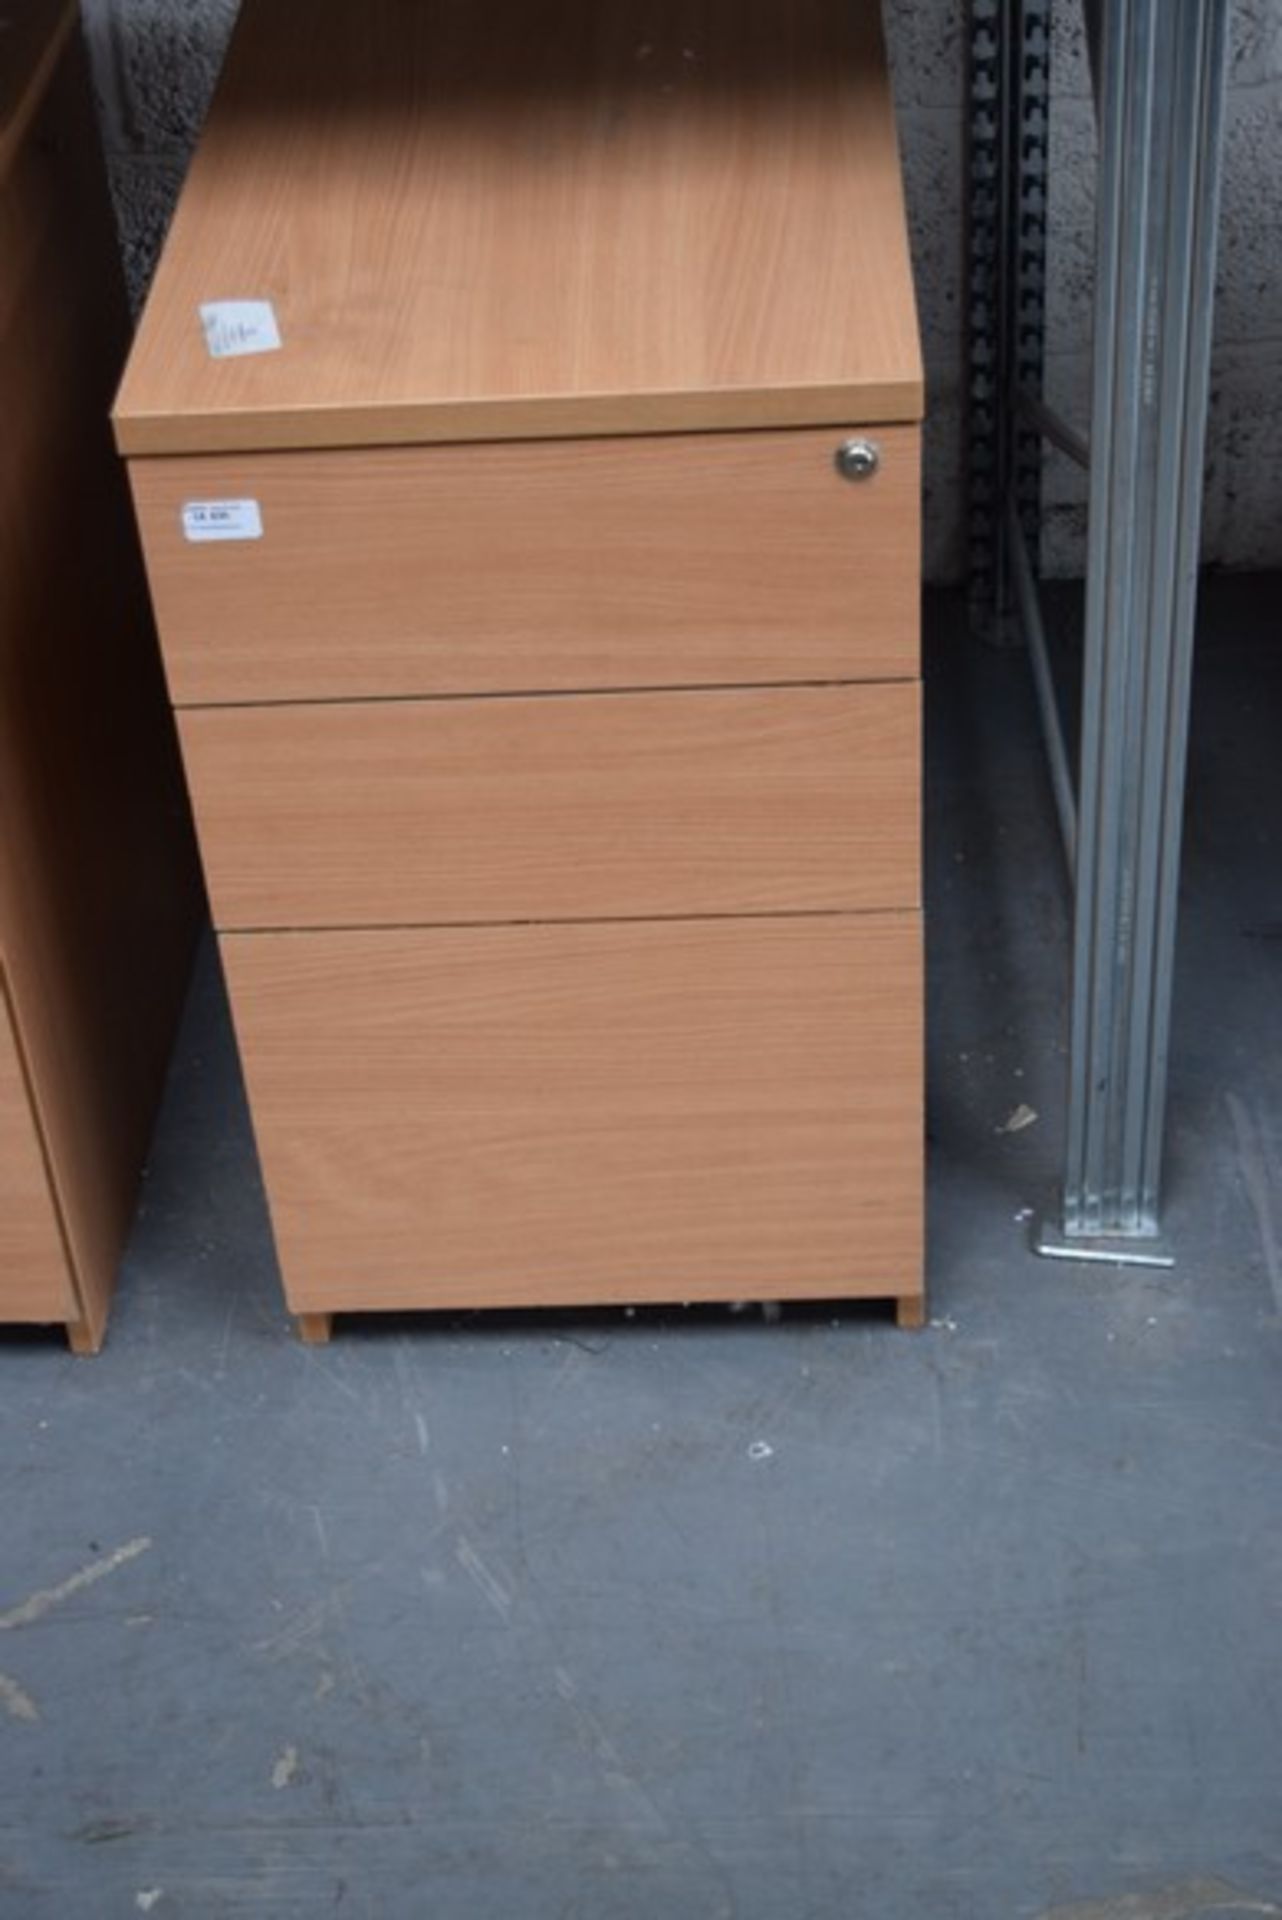 1 x DESIGNER UNDER DESK 2 DRAWER FILING CABINET RRP £50 *PLEASE NOTE THAT THE BID PRICE IS